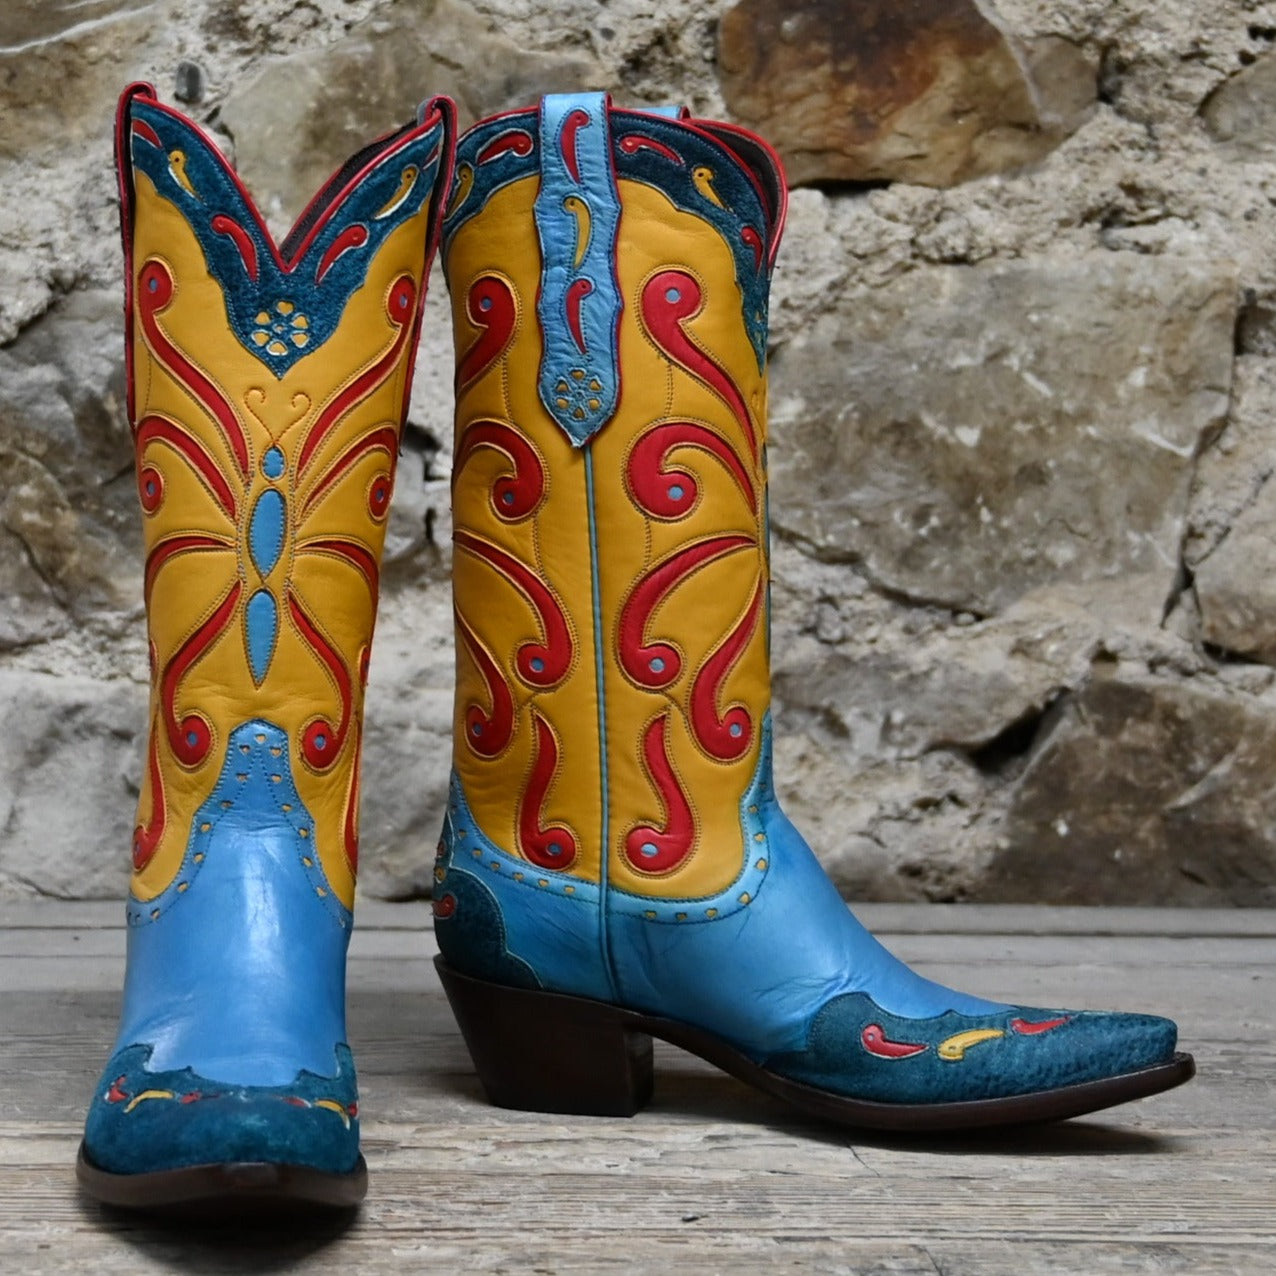 Stallion Ladies Deco Butterfly Boot W/Banana Glove Calf Inlays Foxing and Wingtip. view of front and side